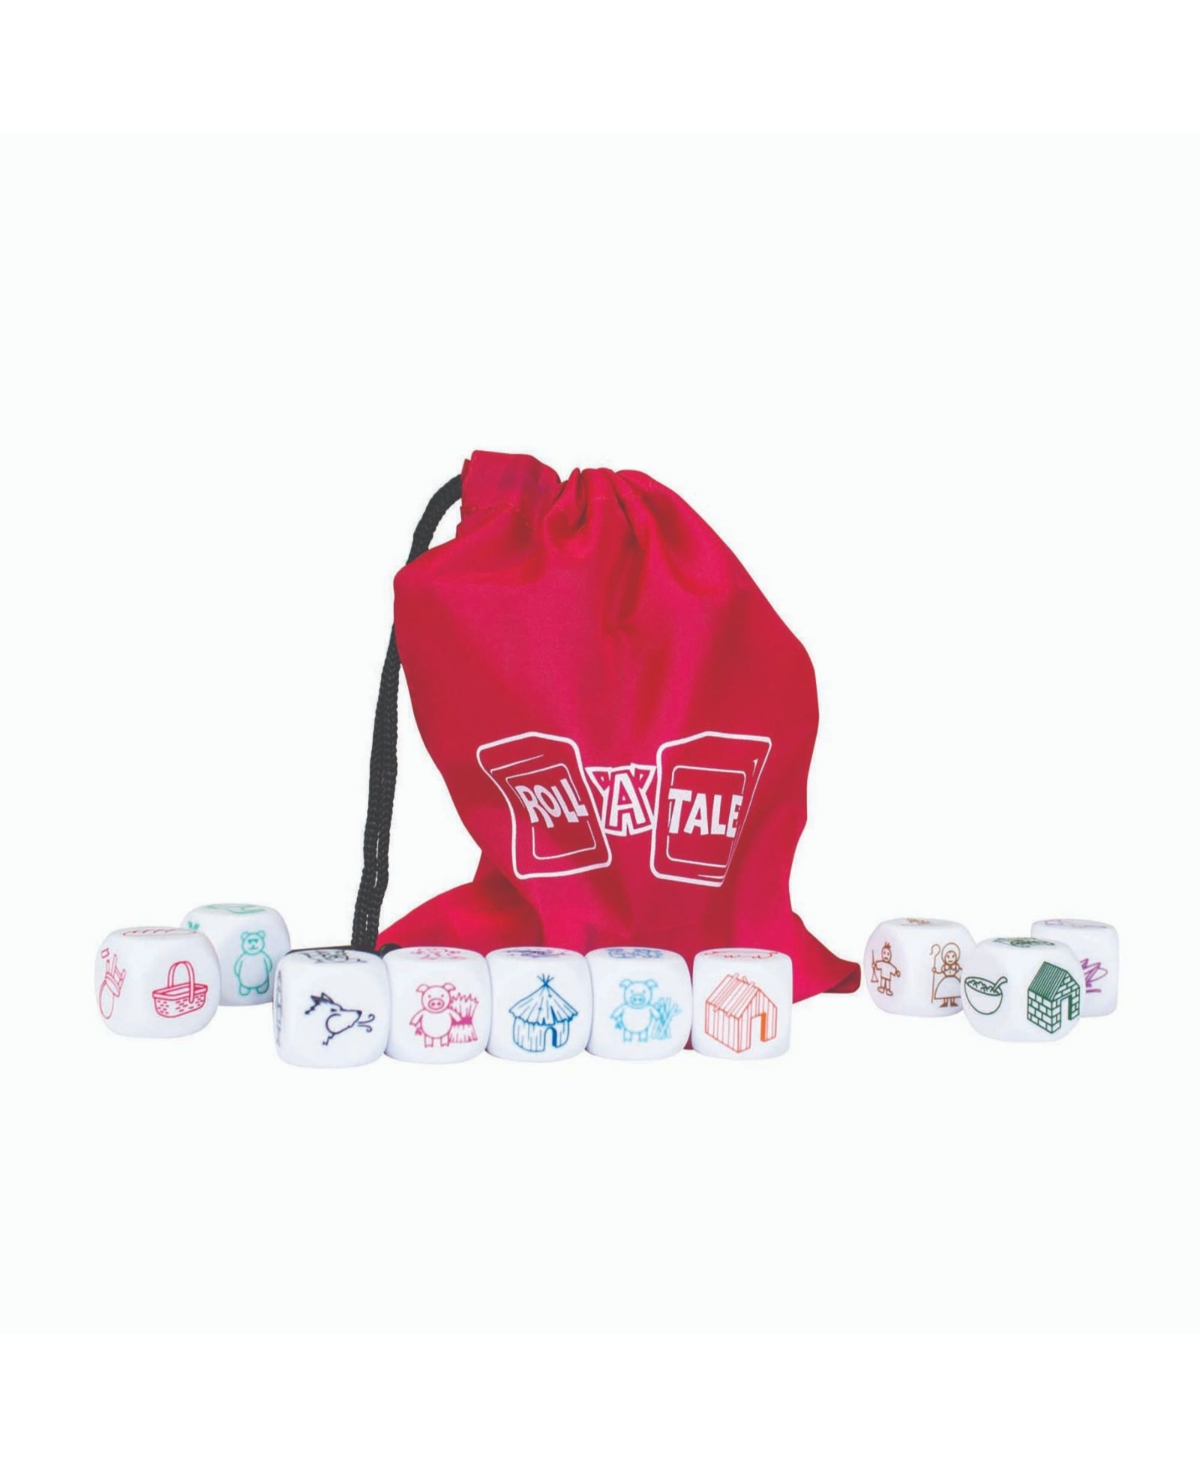 Shop Redbox Junior Learning Roll A Tale Language Skills Dice Game In Open Misce